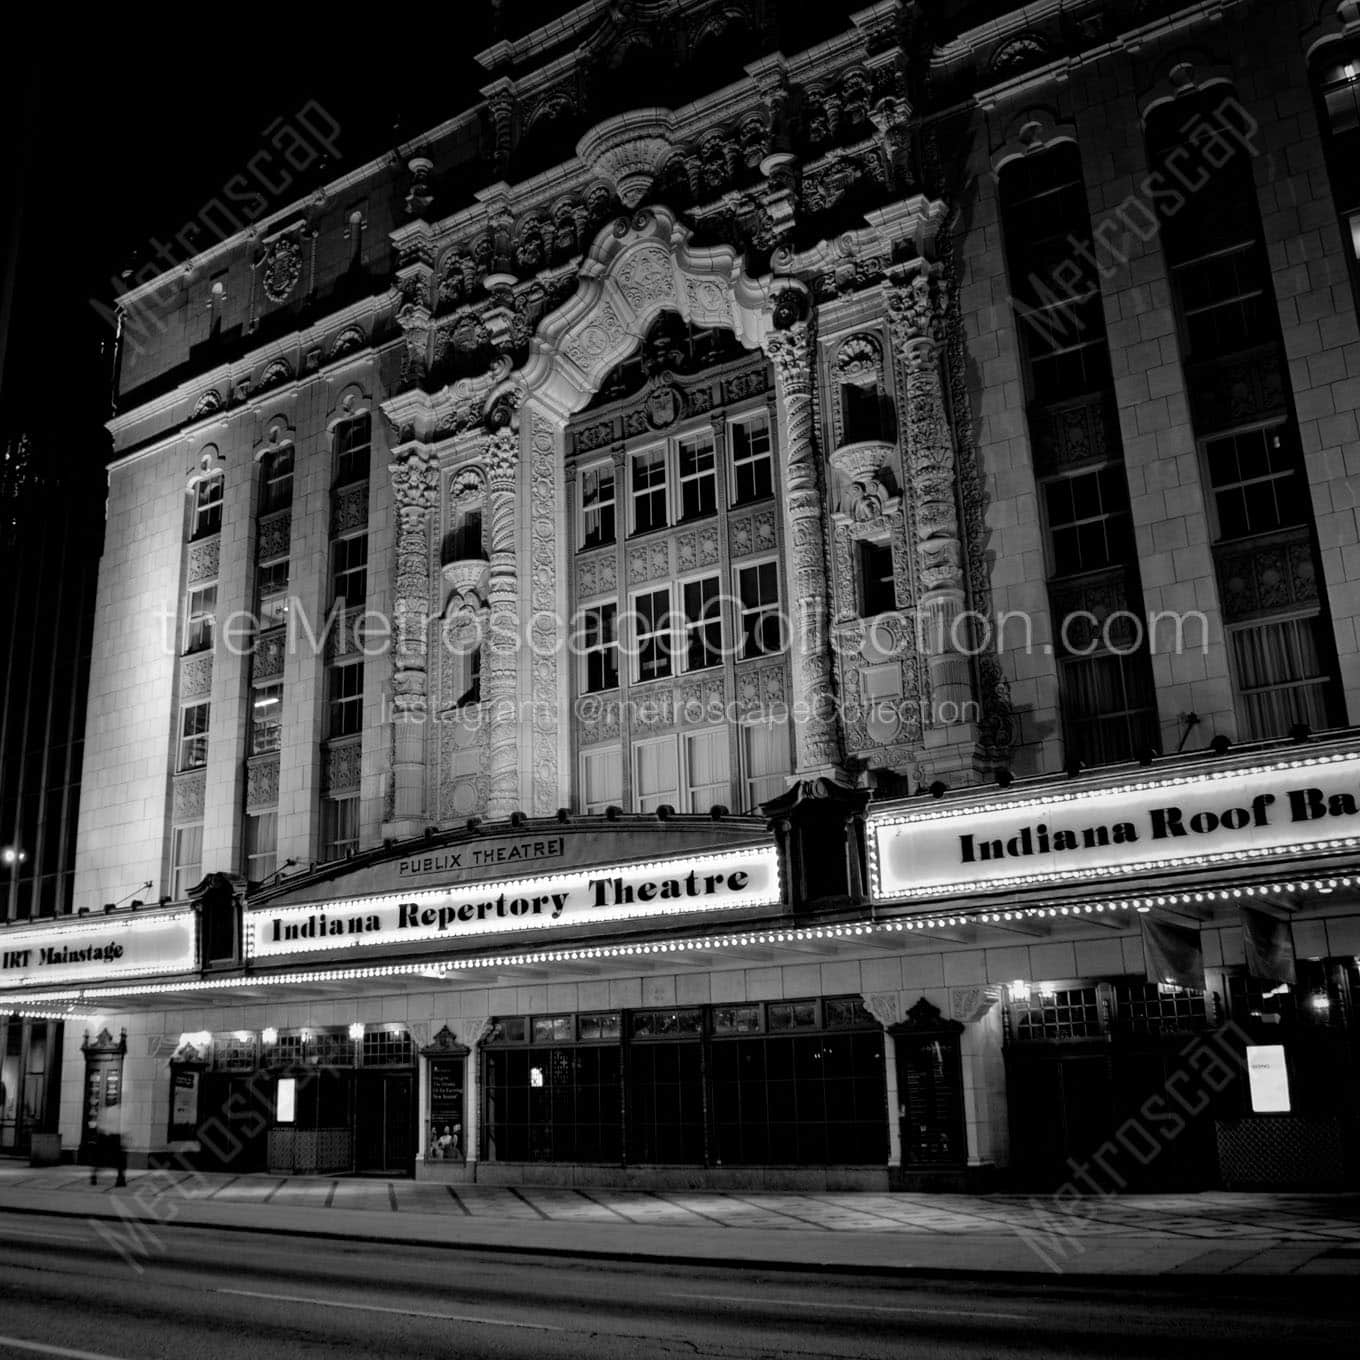 publix theater at night Black & White Wall Art